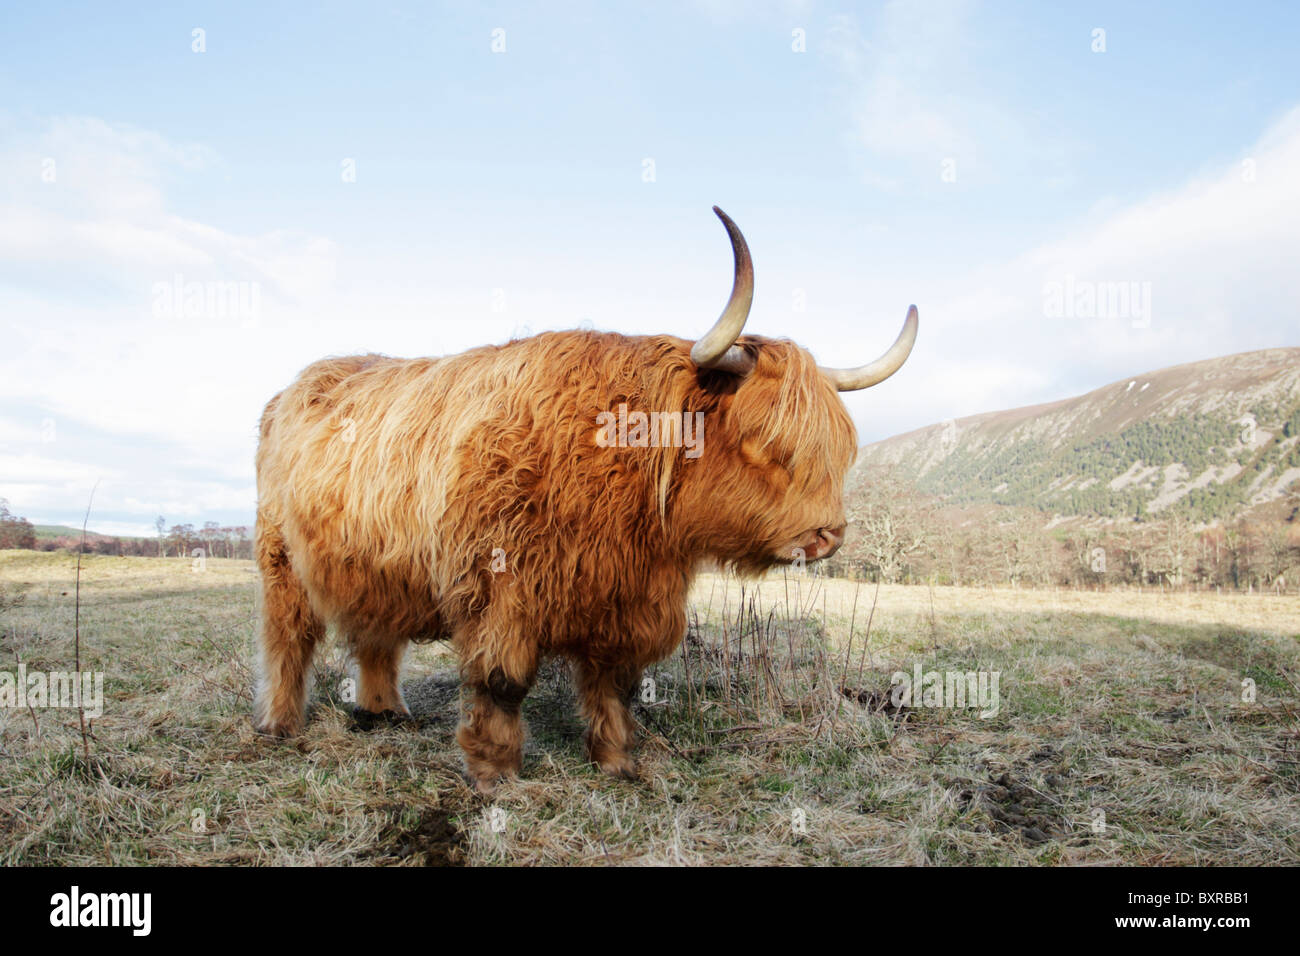 Highland cattle standing among rough grasses which is their preferred grazing habitat with Scottish mountains in the distance Stock Photo